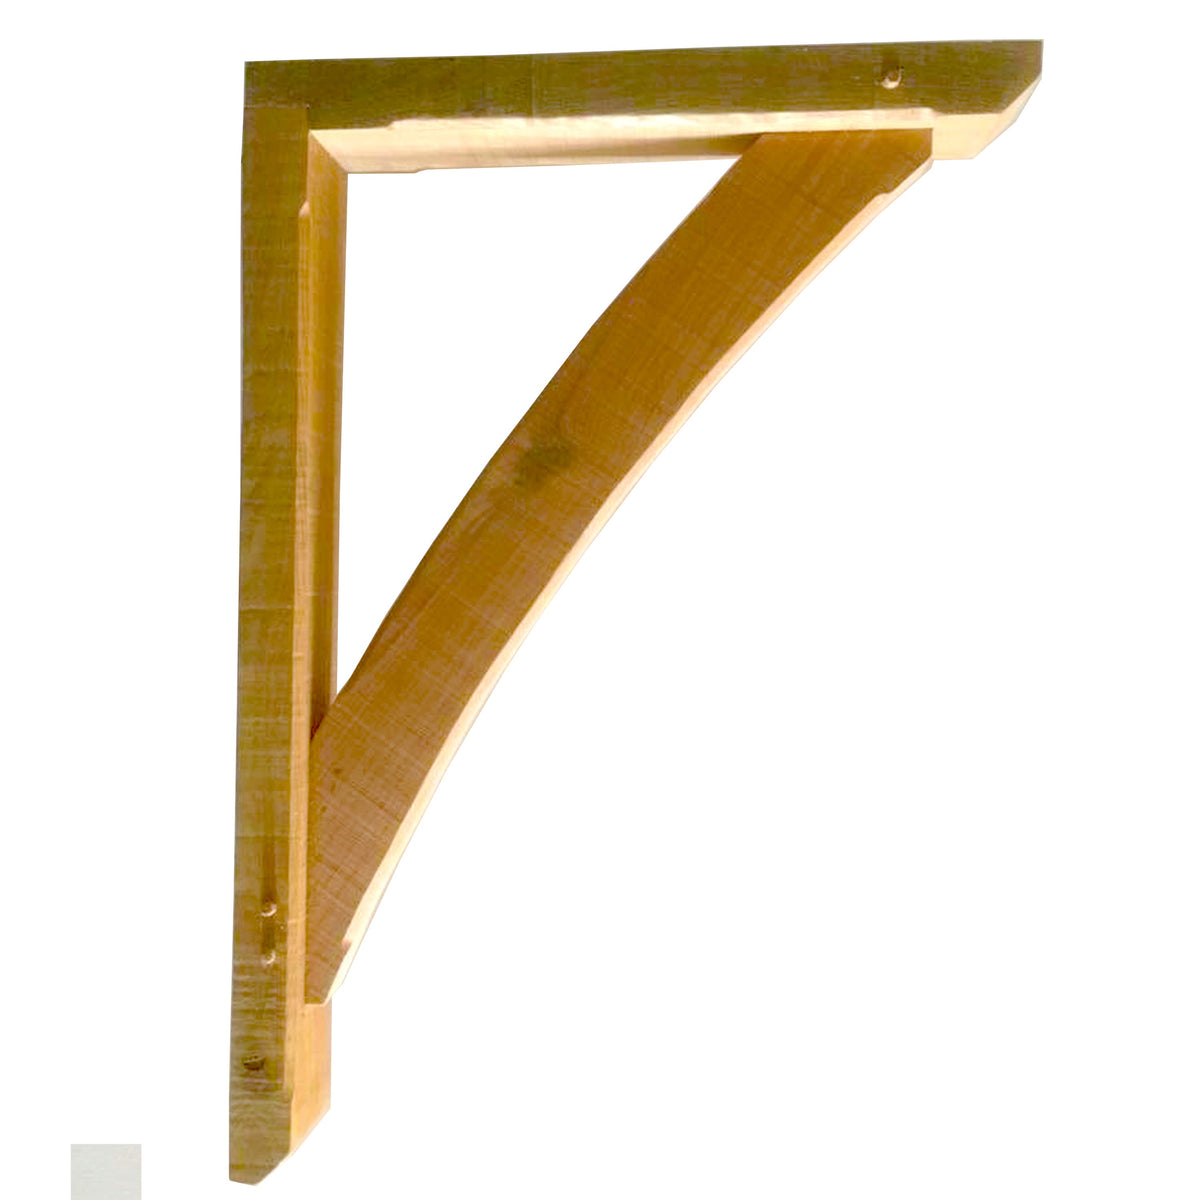 Winder Joinery Gallows Brackets